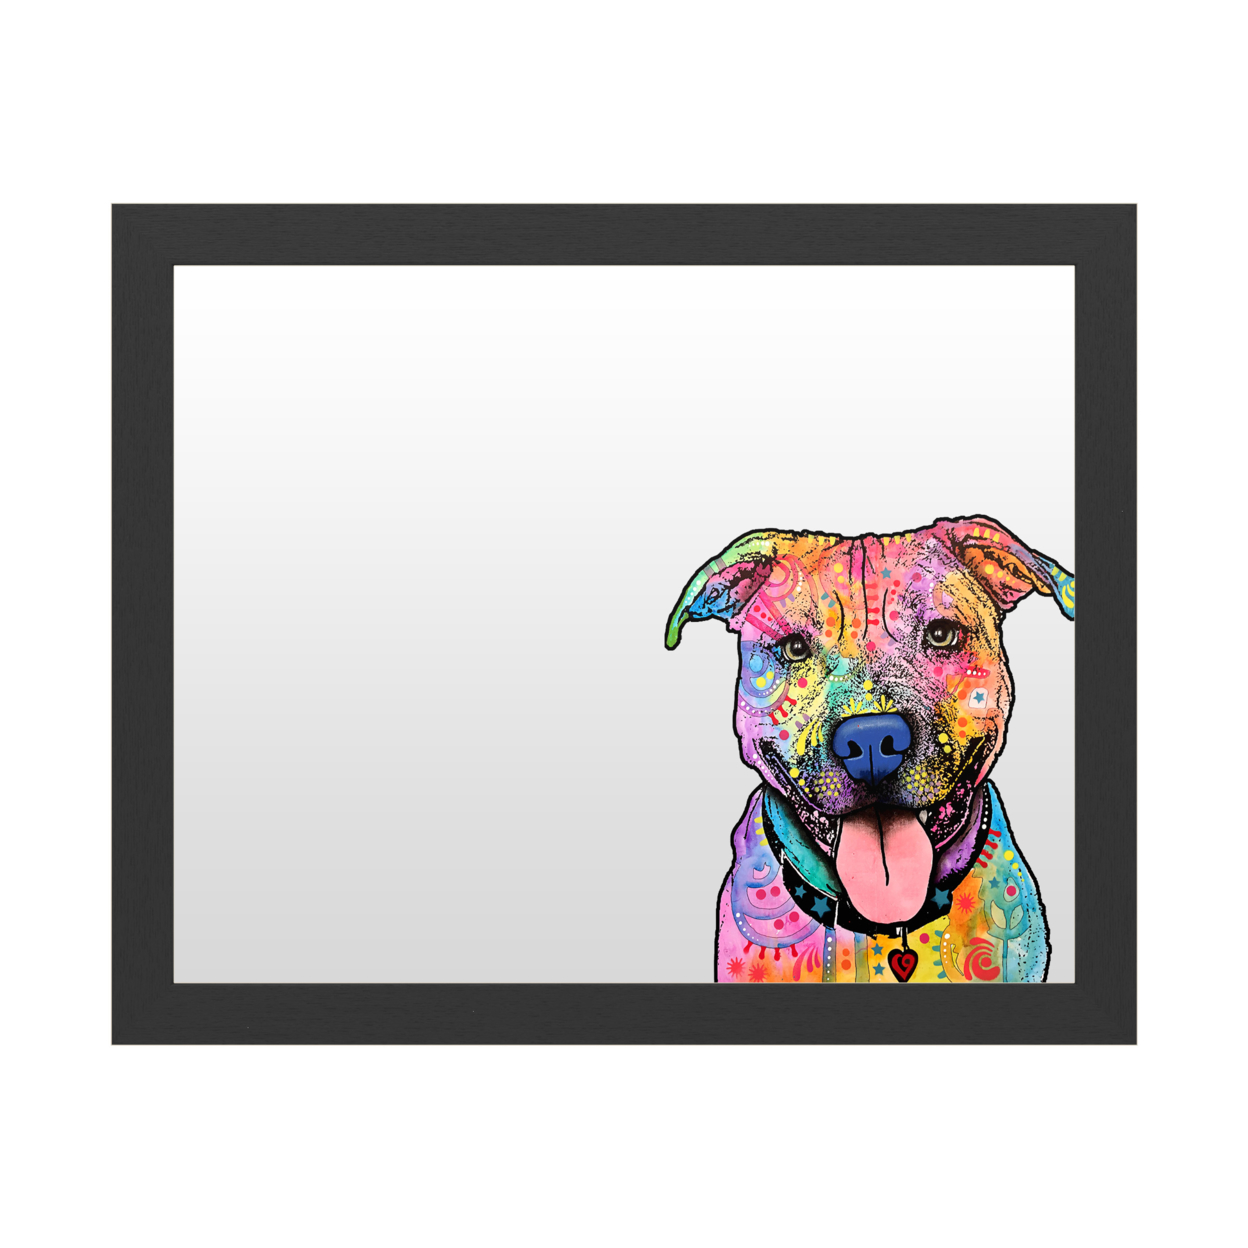 Dry Erase 16 X 20 Marker Board With Printed Artwork - Dean Russo Best Dog White Board - Ready To Hang